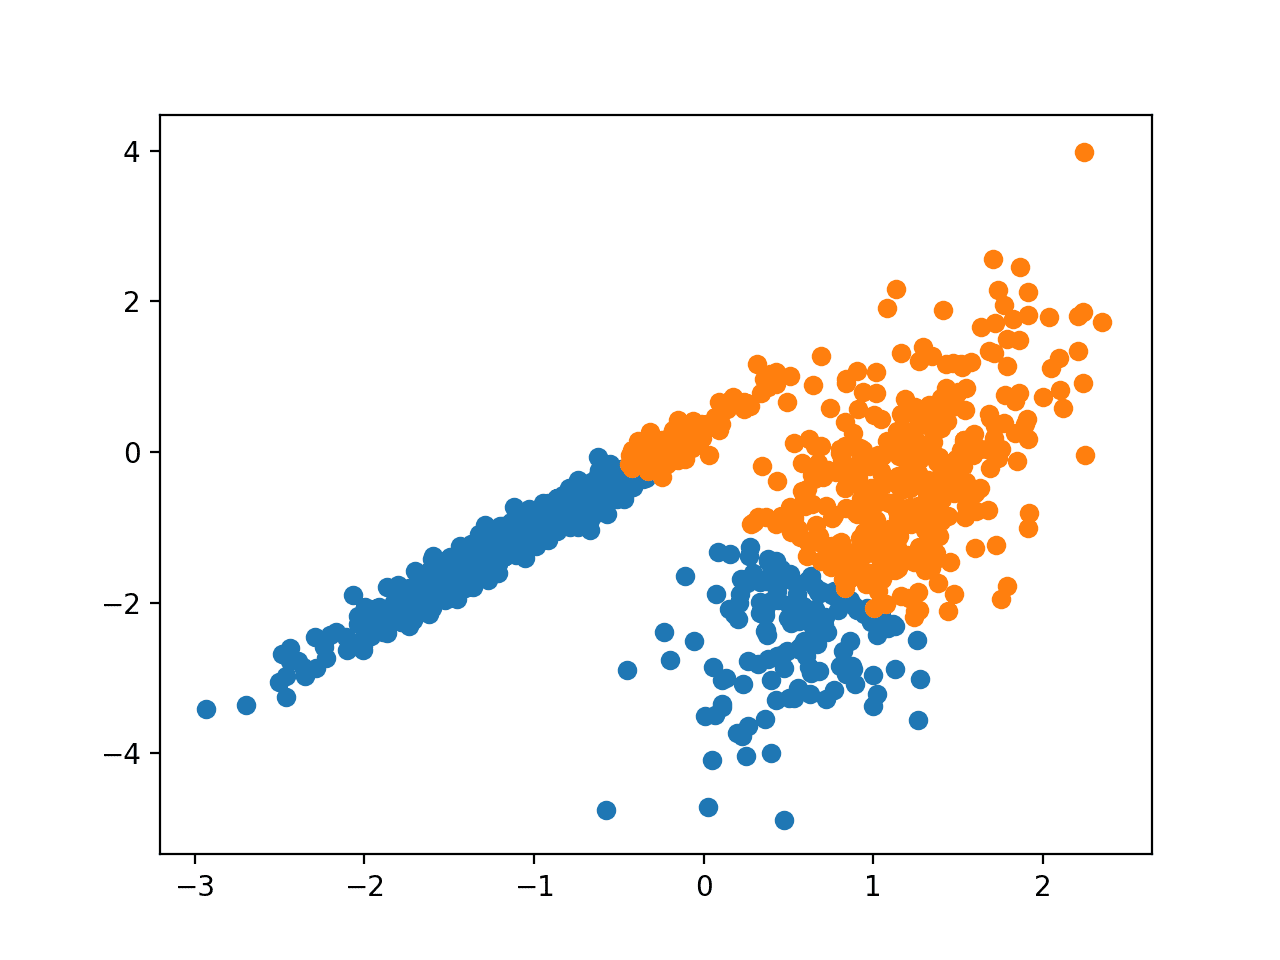 Scatter Plot of Dataset With Clusters Identified Using Mini-Batch K-Means Clustering